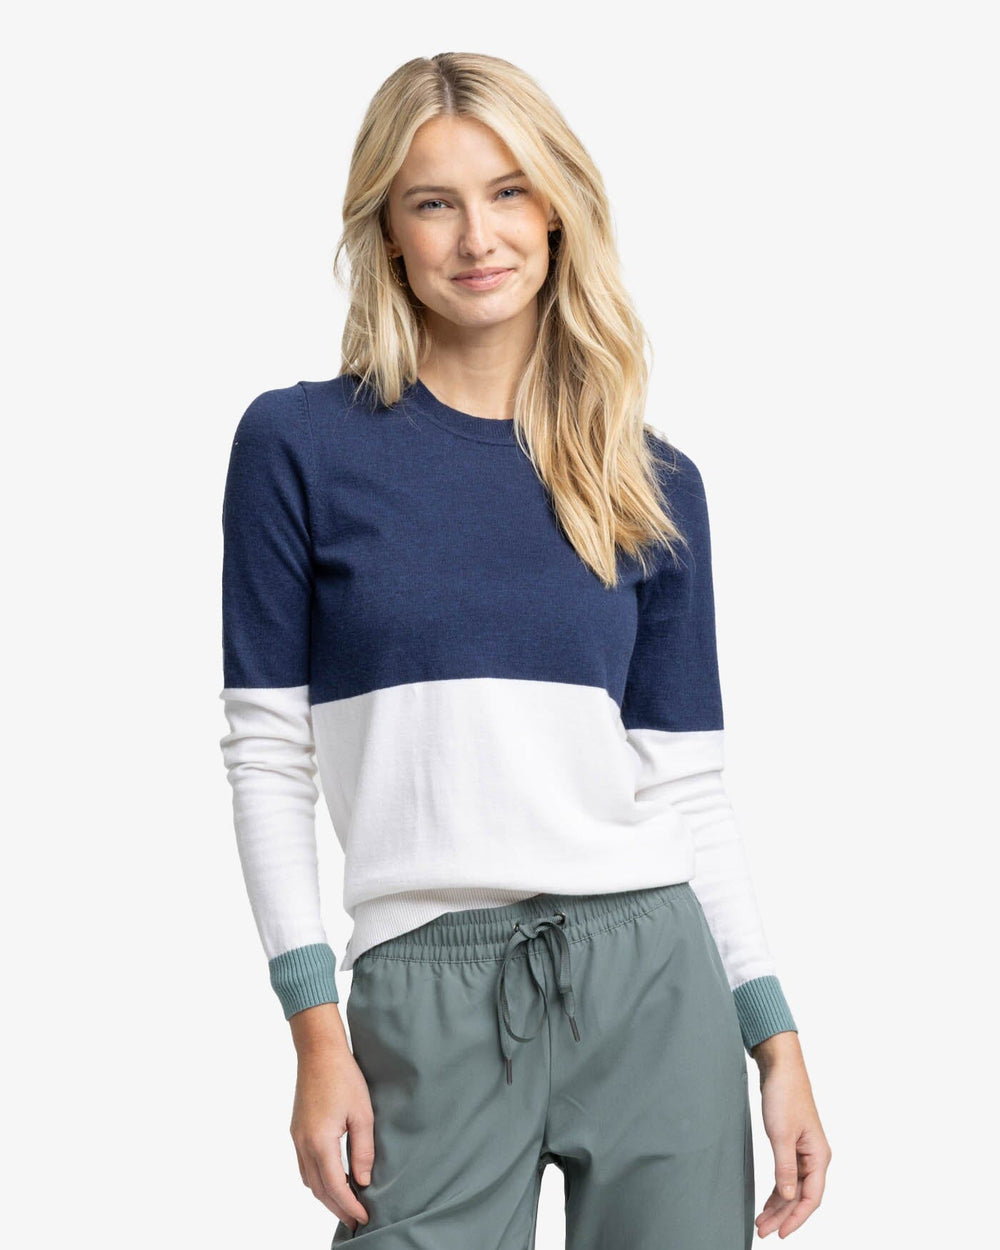 The front view of the Southern Tide Colorblock Fireside Sweater by Southern Tide - Nautical Navy